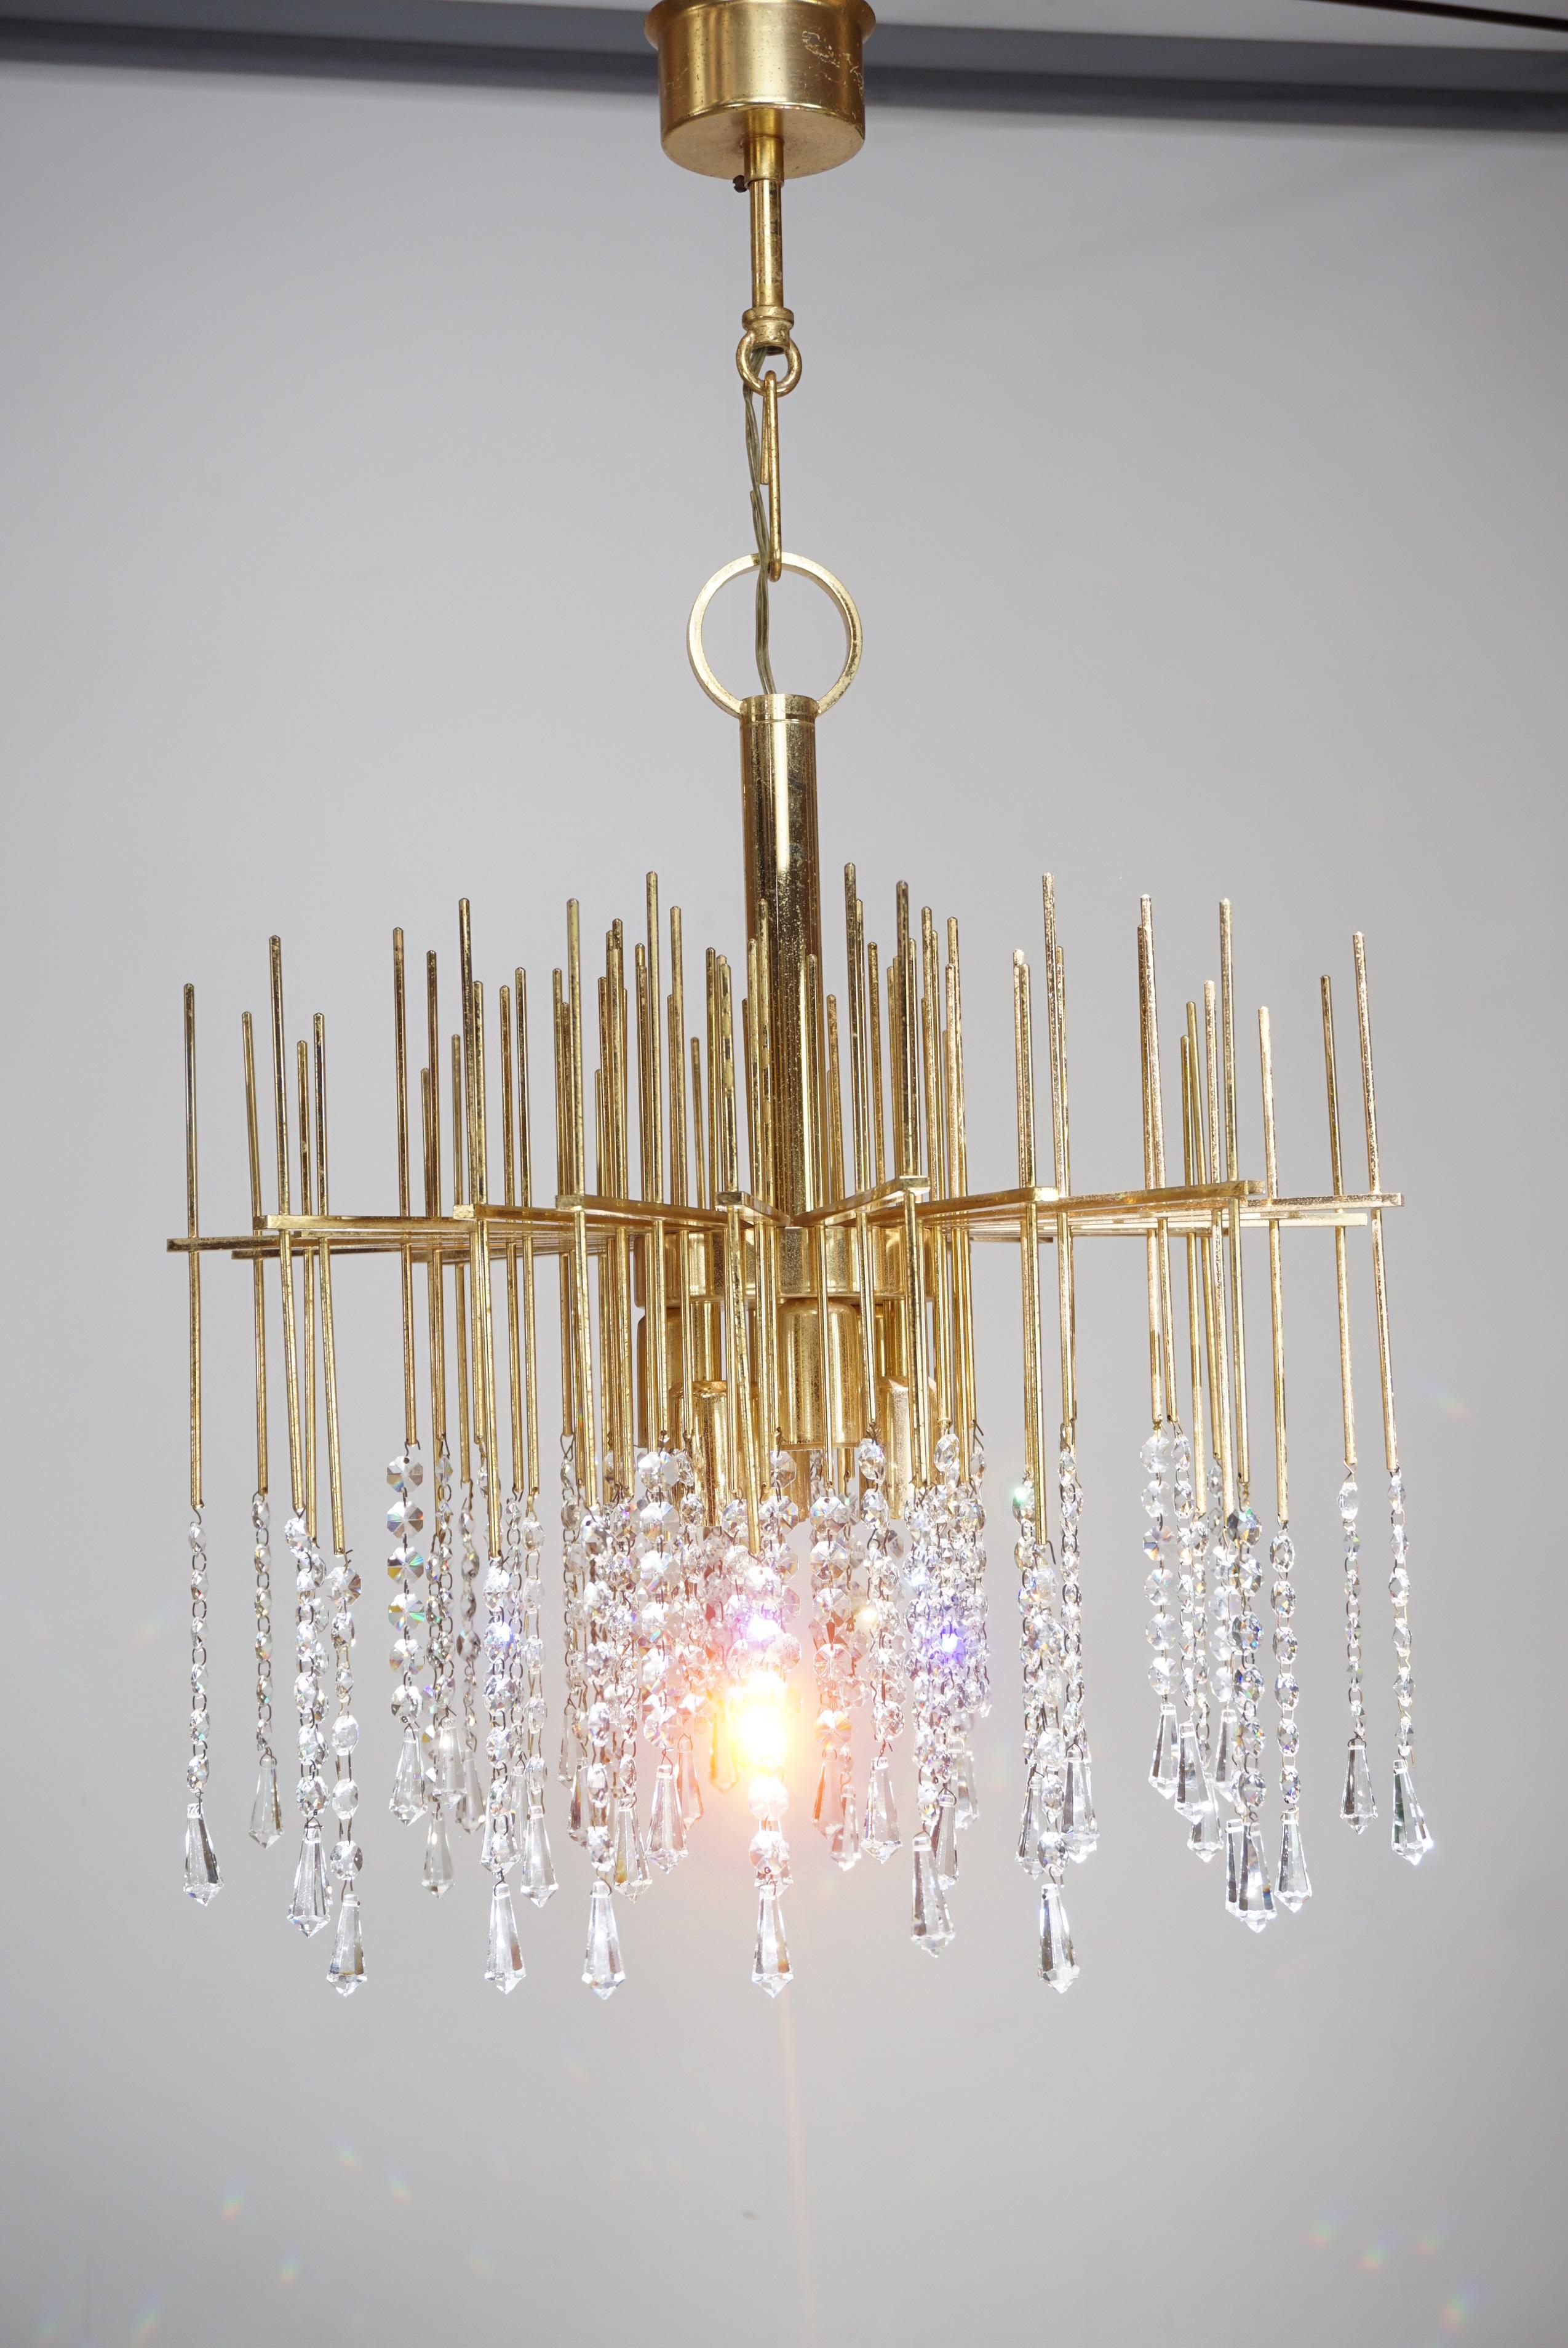 Mid-20th Century Brass and Cristal Chandelier Hollywood Regency Style